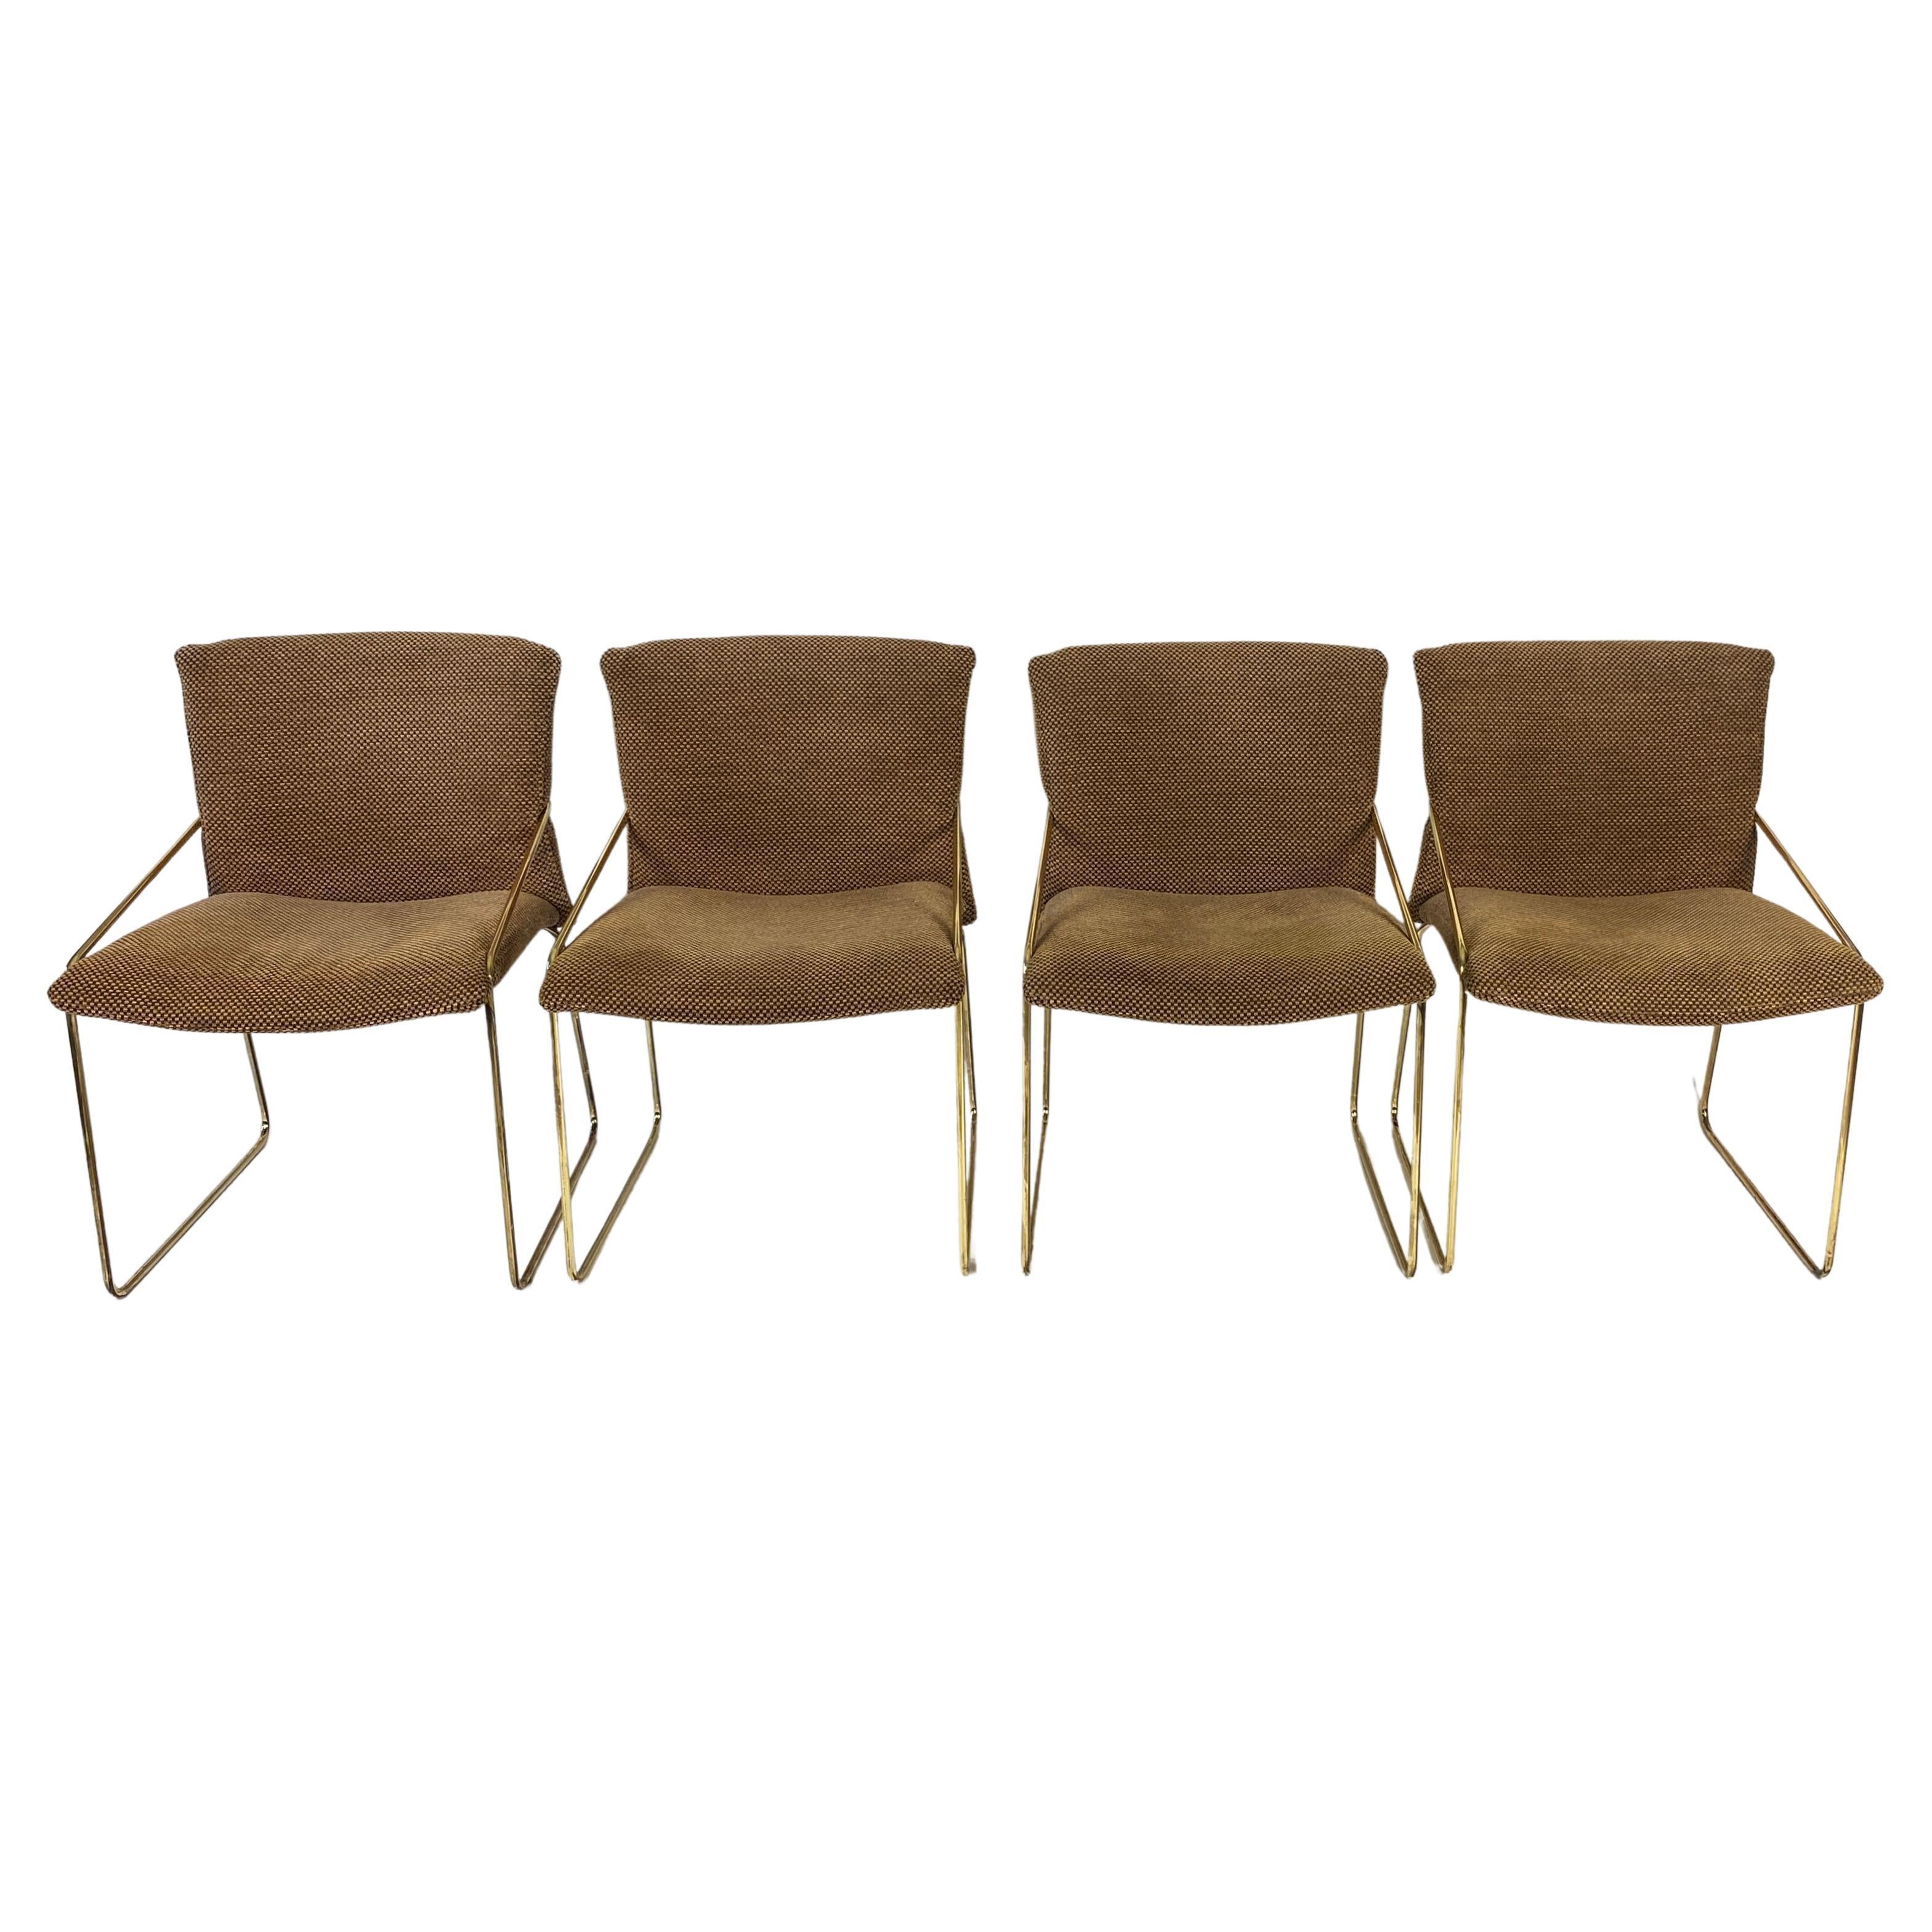 Set of 4 Brass and Upholstered Side Chairs in the Style of Milo Baughman